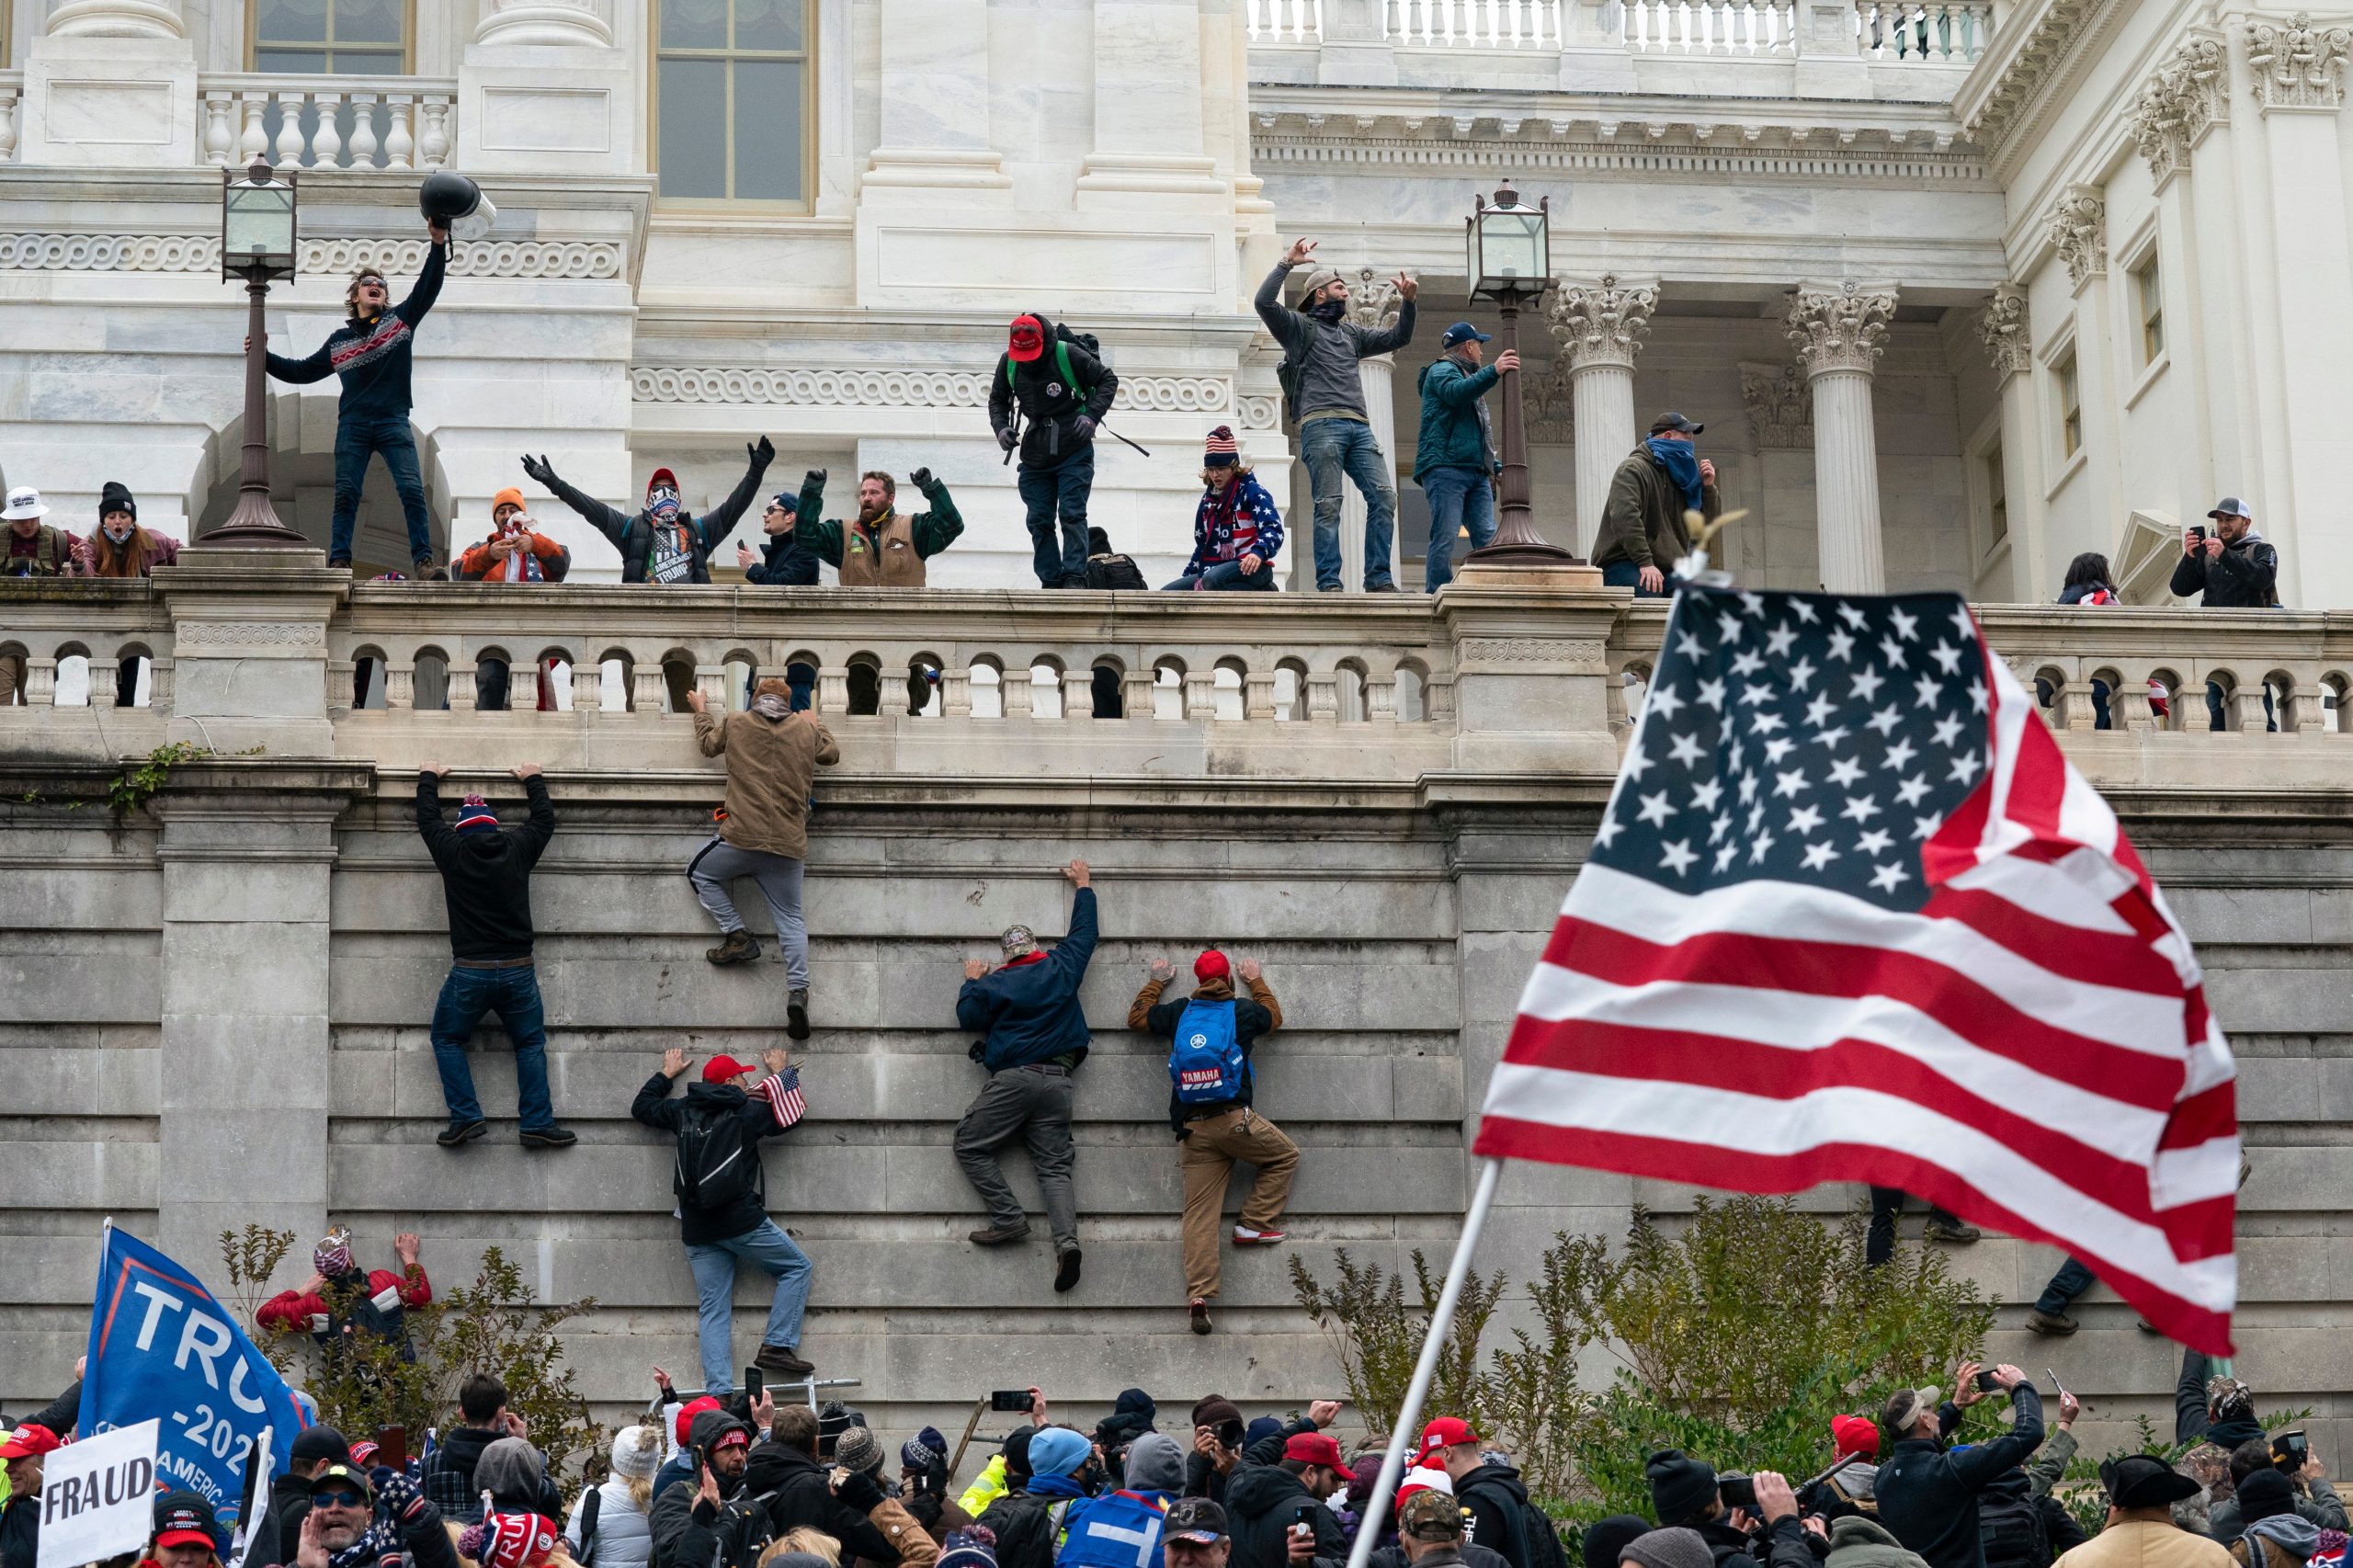 Biden administration vows to hold Capitol riot perpetrators legally accountable